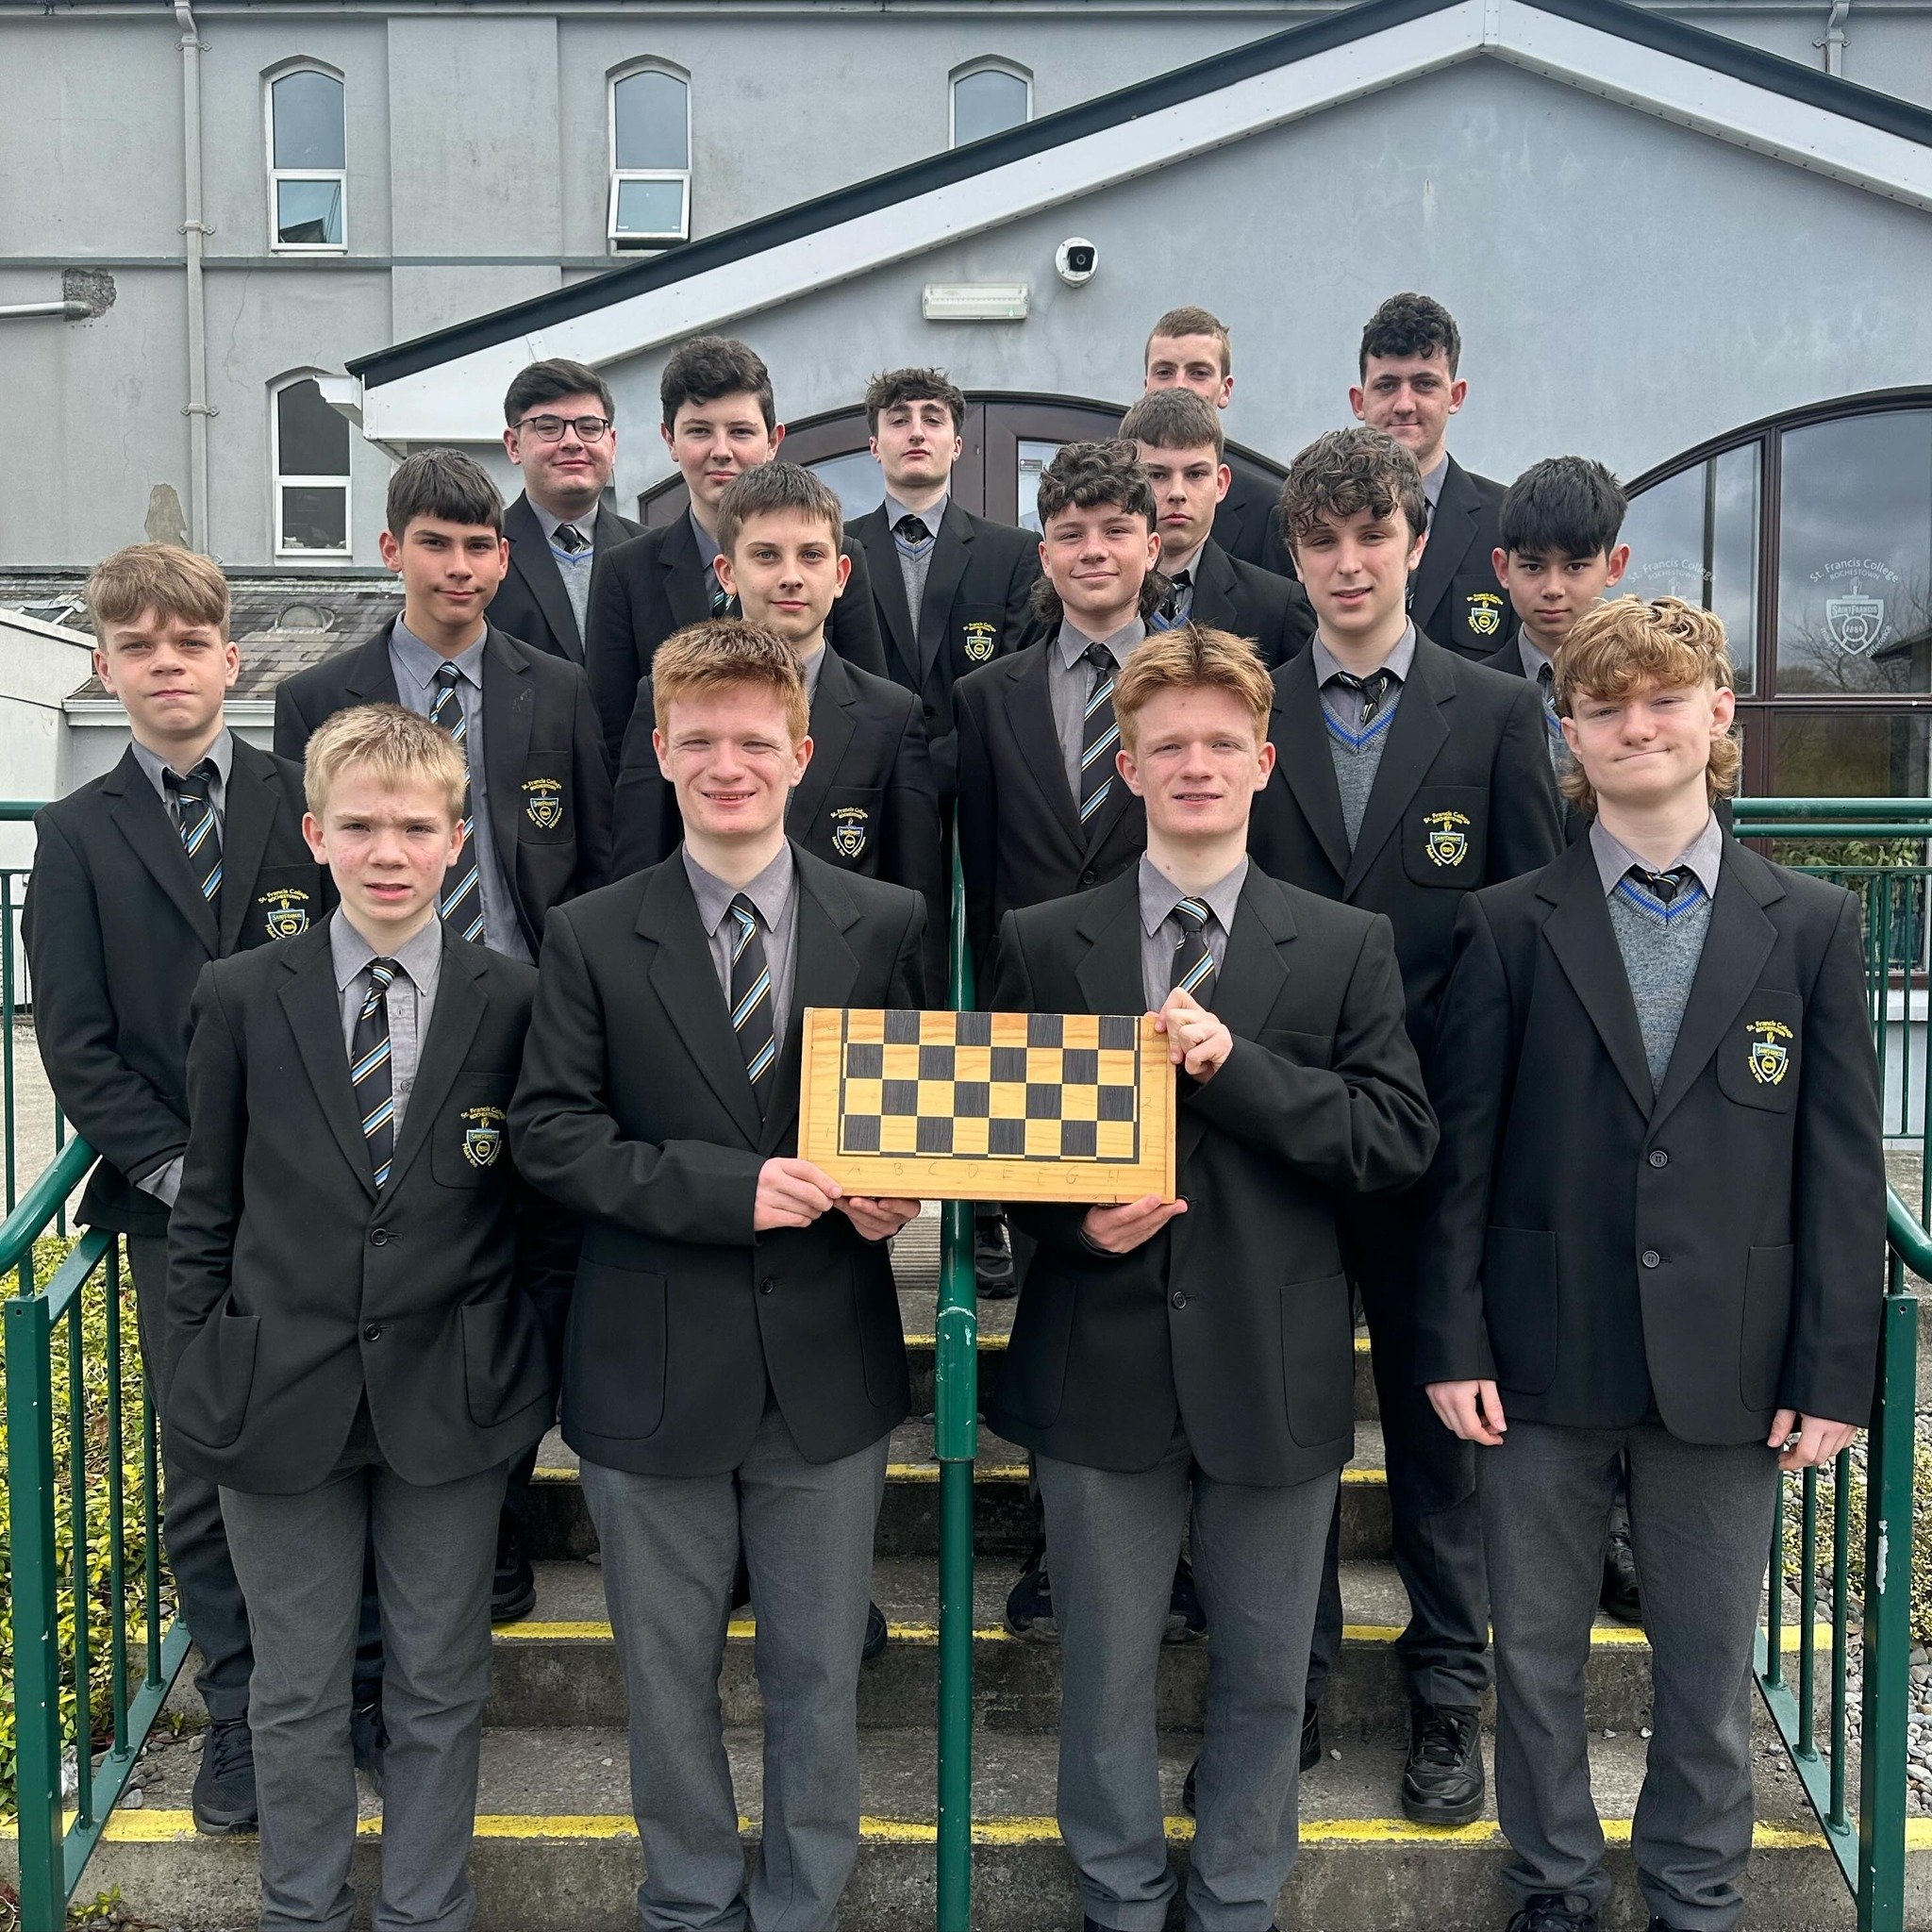 The very best of luck to our amazing Chess teams who are playing in CheckMate Irish Chess Finals in Nenagh today! ♟️